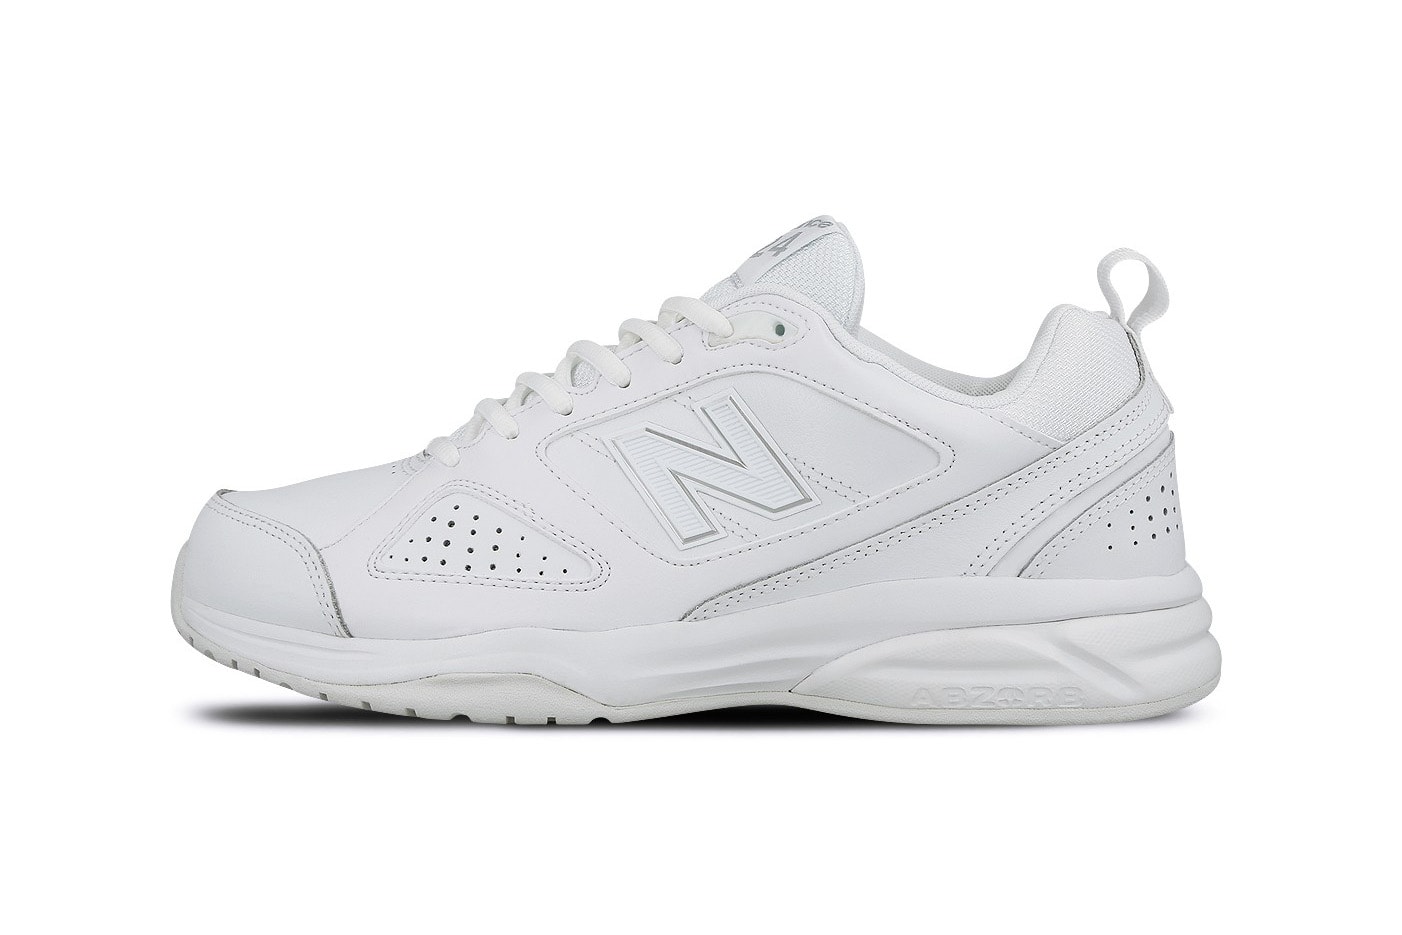 New Balance MX 624 Black White Chunky Dad Sneakers Trainers